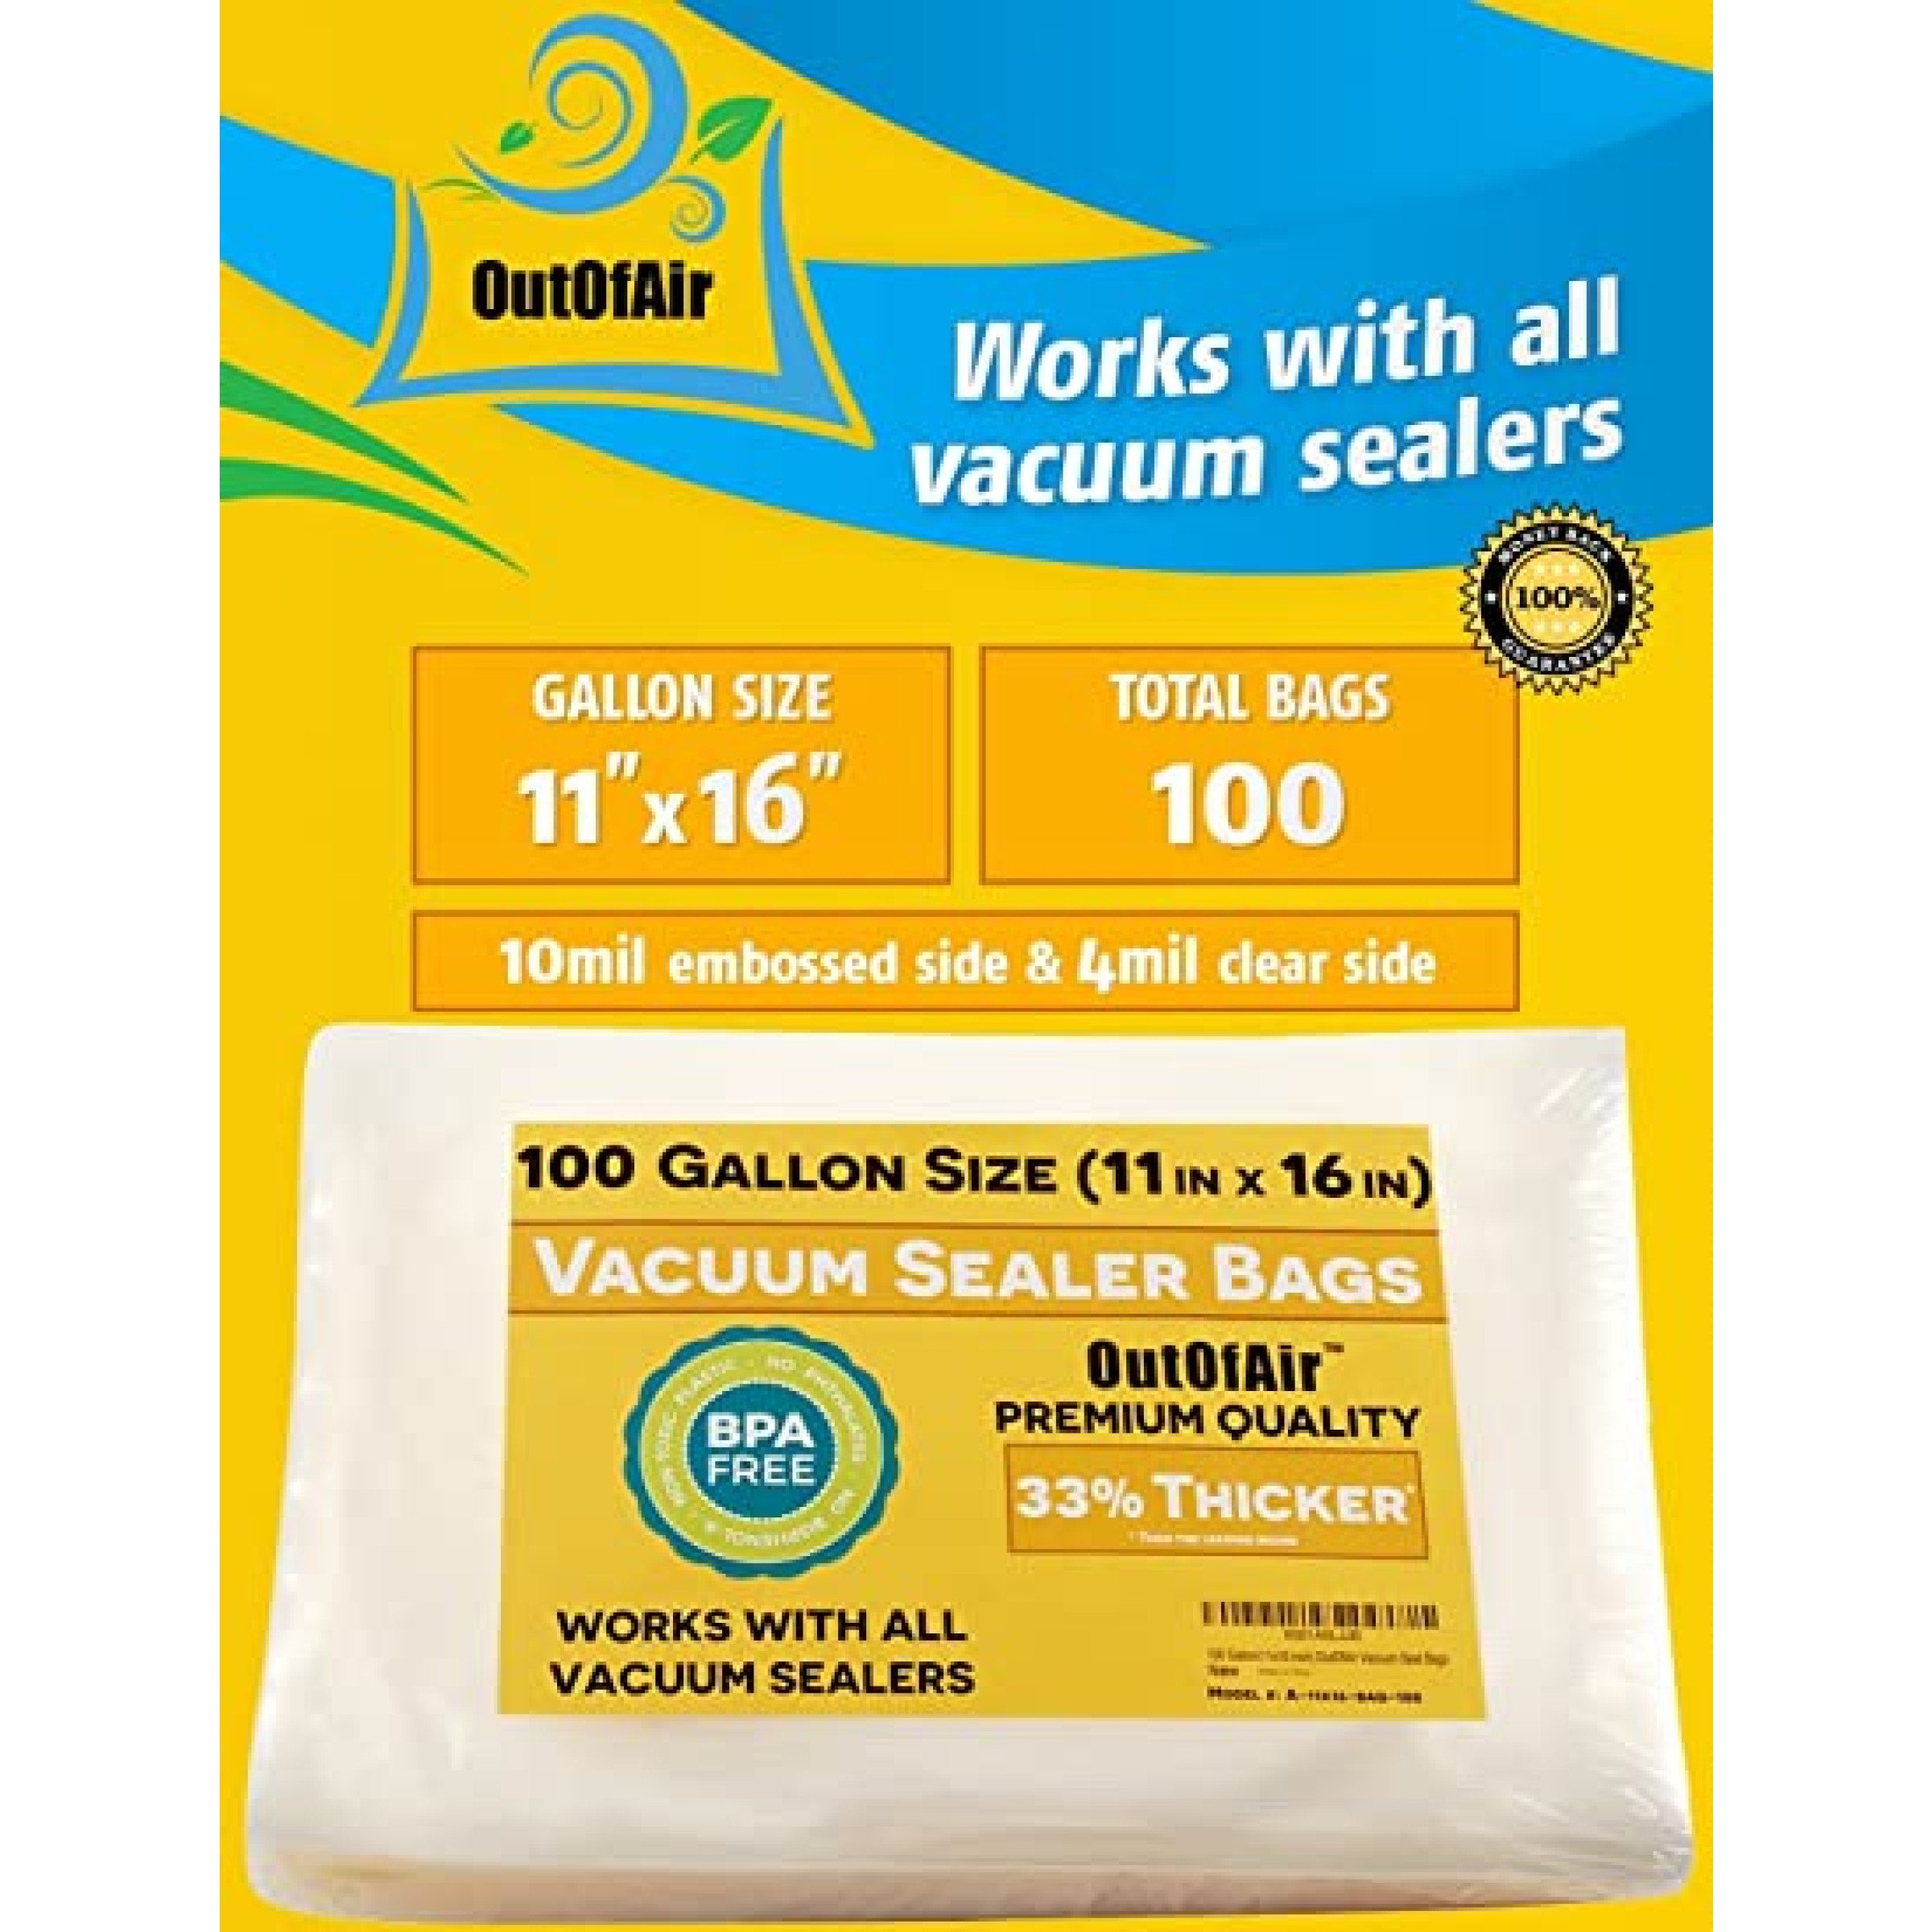 BPA Free FDA Approved 11 x 16 for Foodsaver 33% Thicker 100 Vacuum Sealer Bags: Gallon Size 